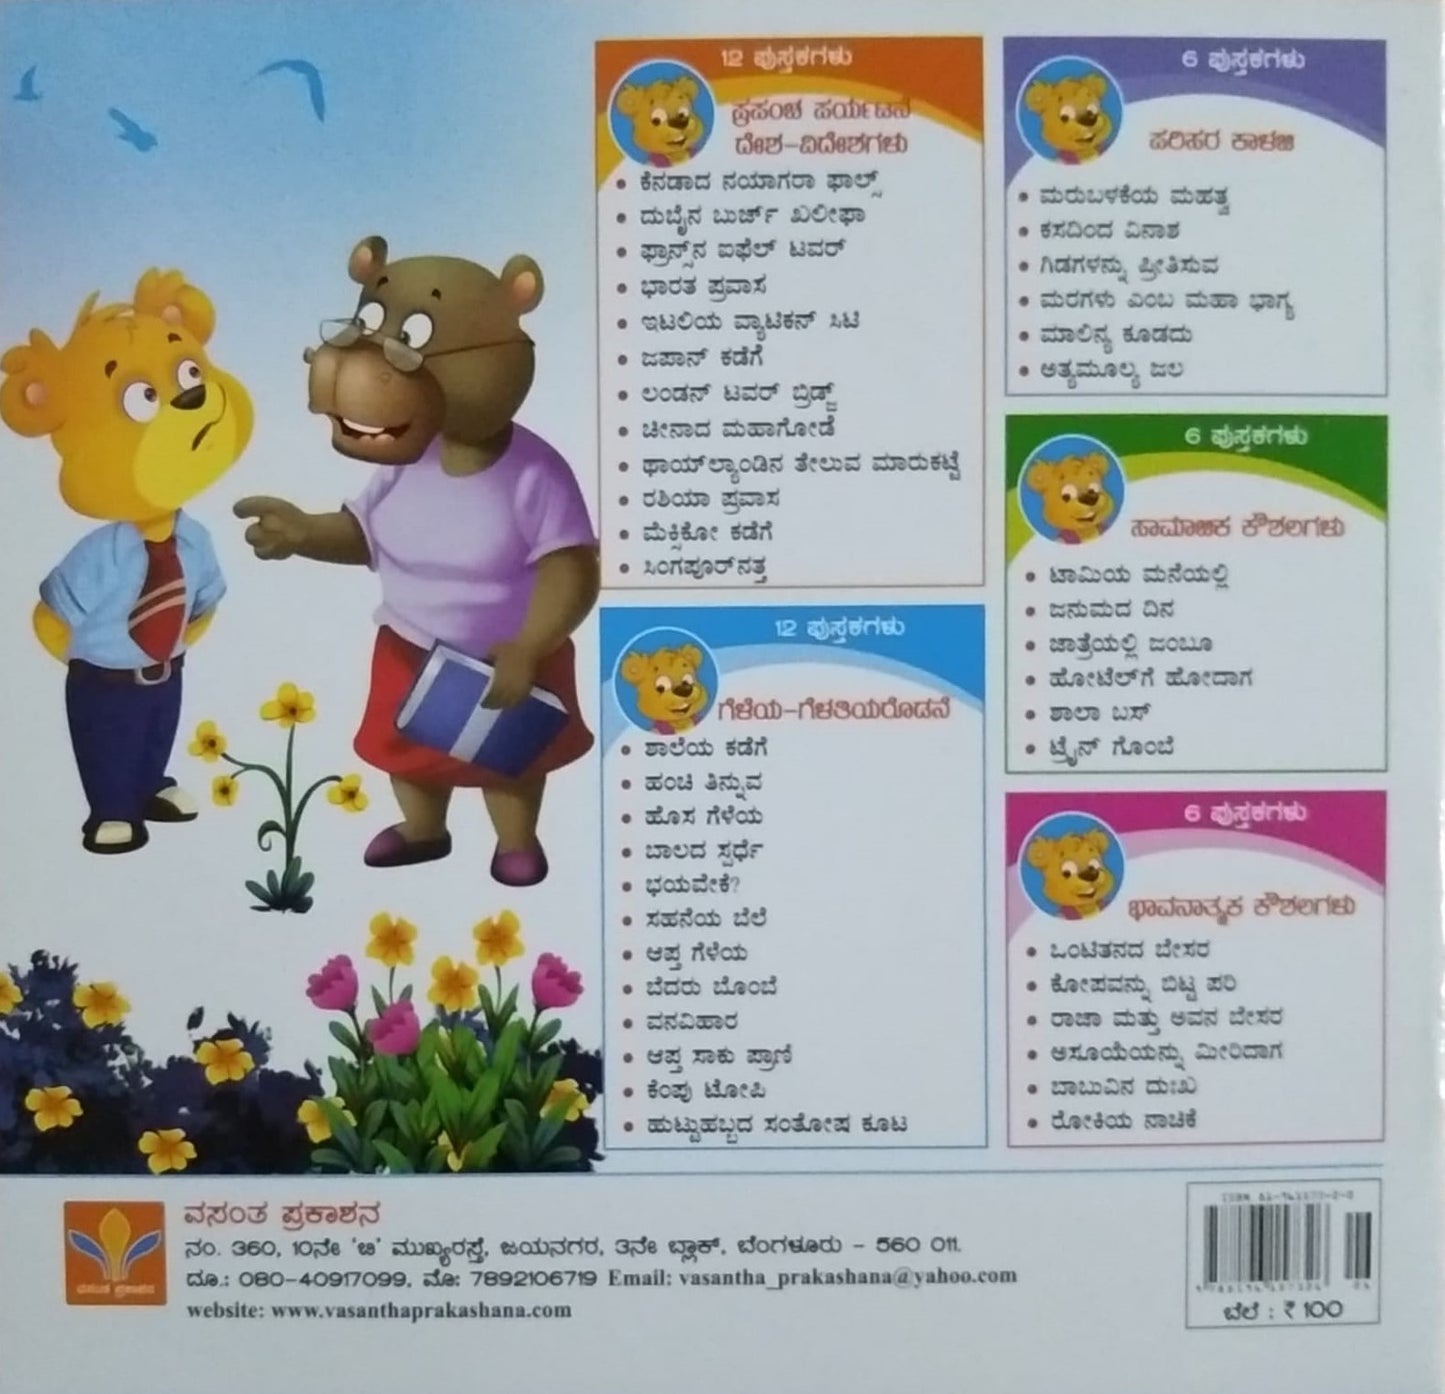 Gidagalannu Preetisuva is a Book with children's stories and colourful Pictures which is Written by S. Pattabhirama and Published by Vasantha Prakashana